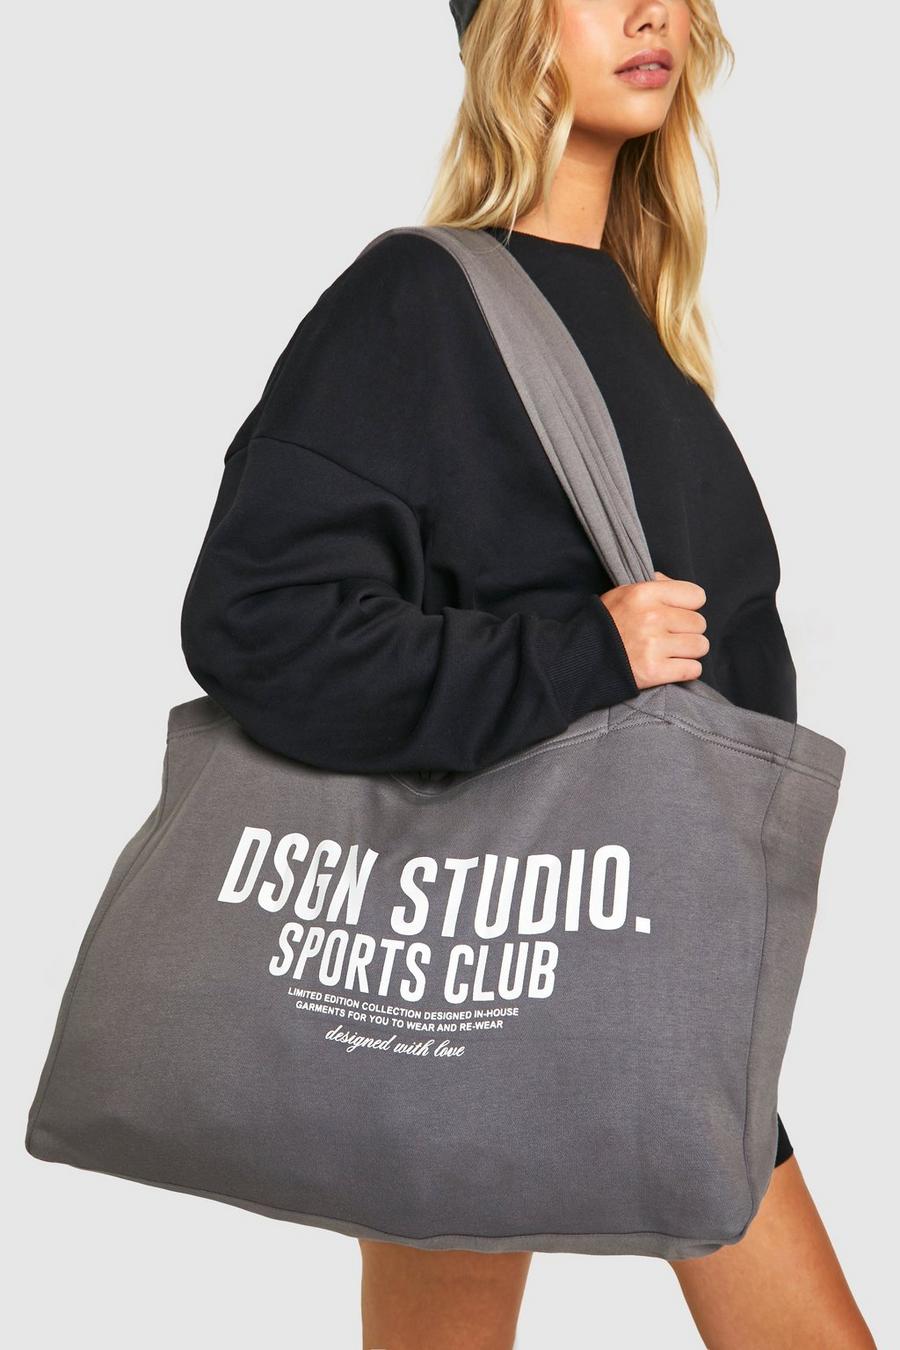 Charcoal Dsgn Studio Sports Club Tote Bag image number 1